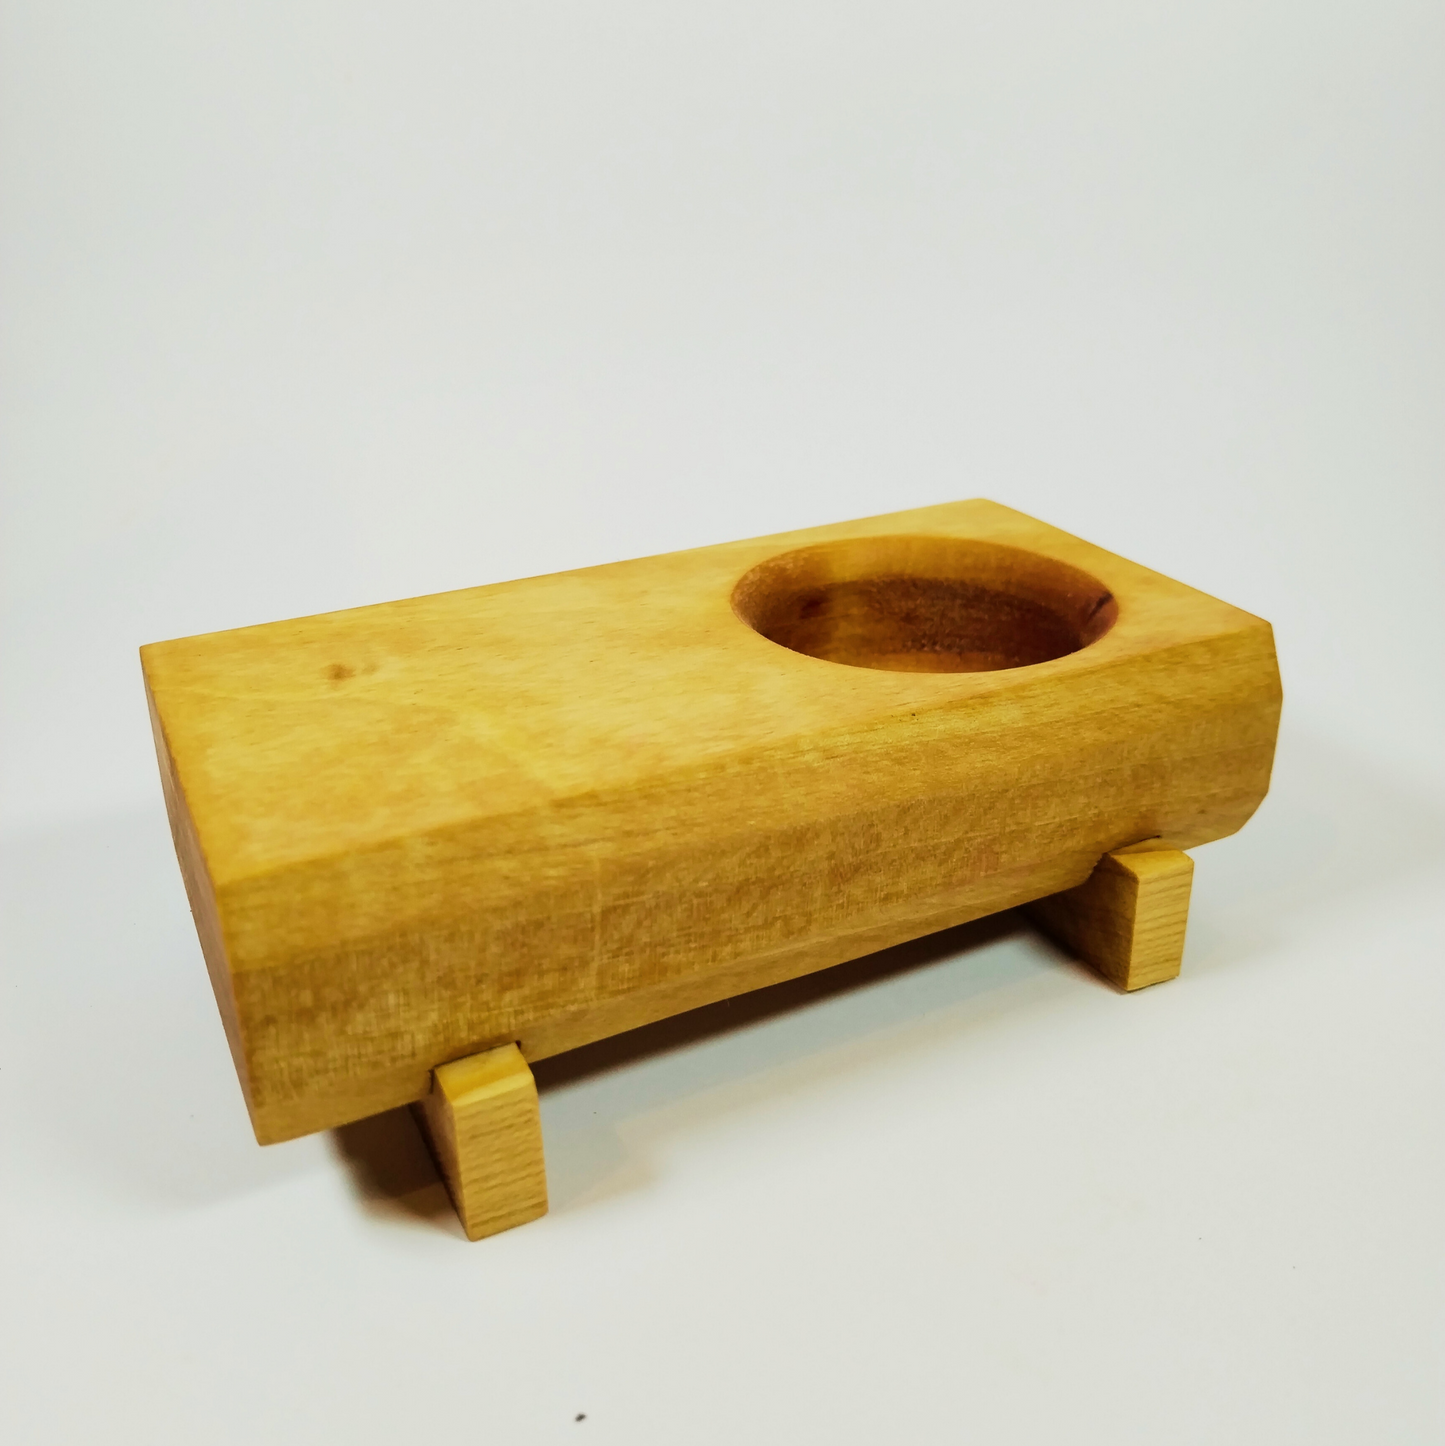 Botanical Prisms in Walnut Wood - Kusamono Toy Pot: a toy that grows with your imagination!